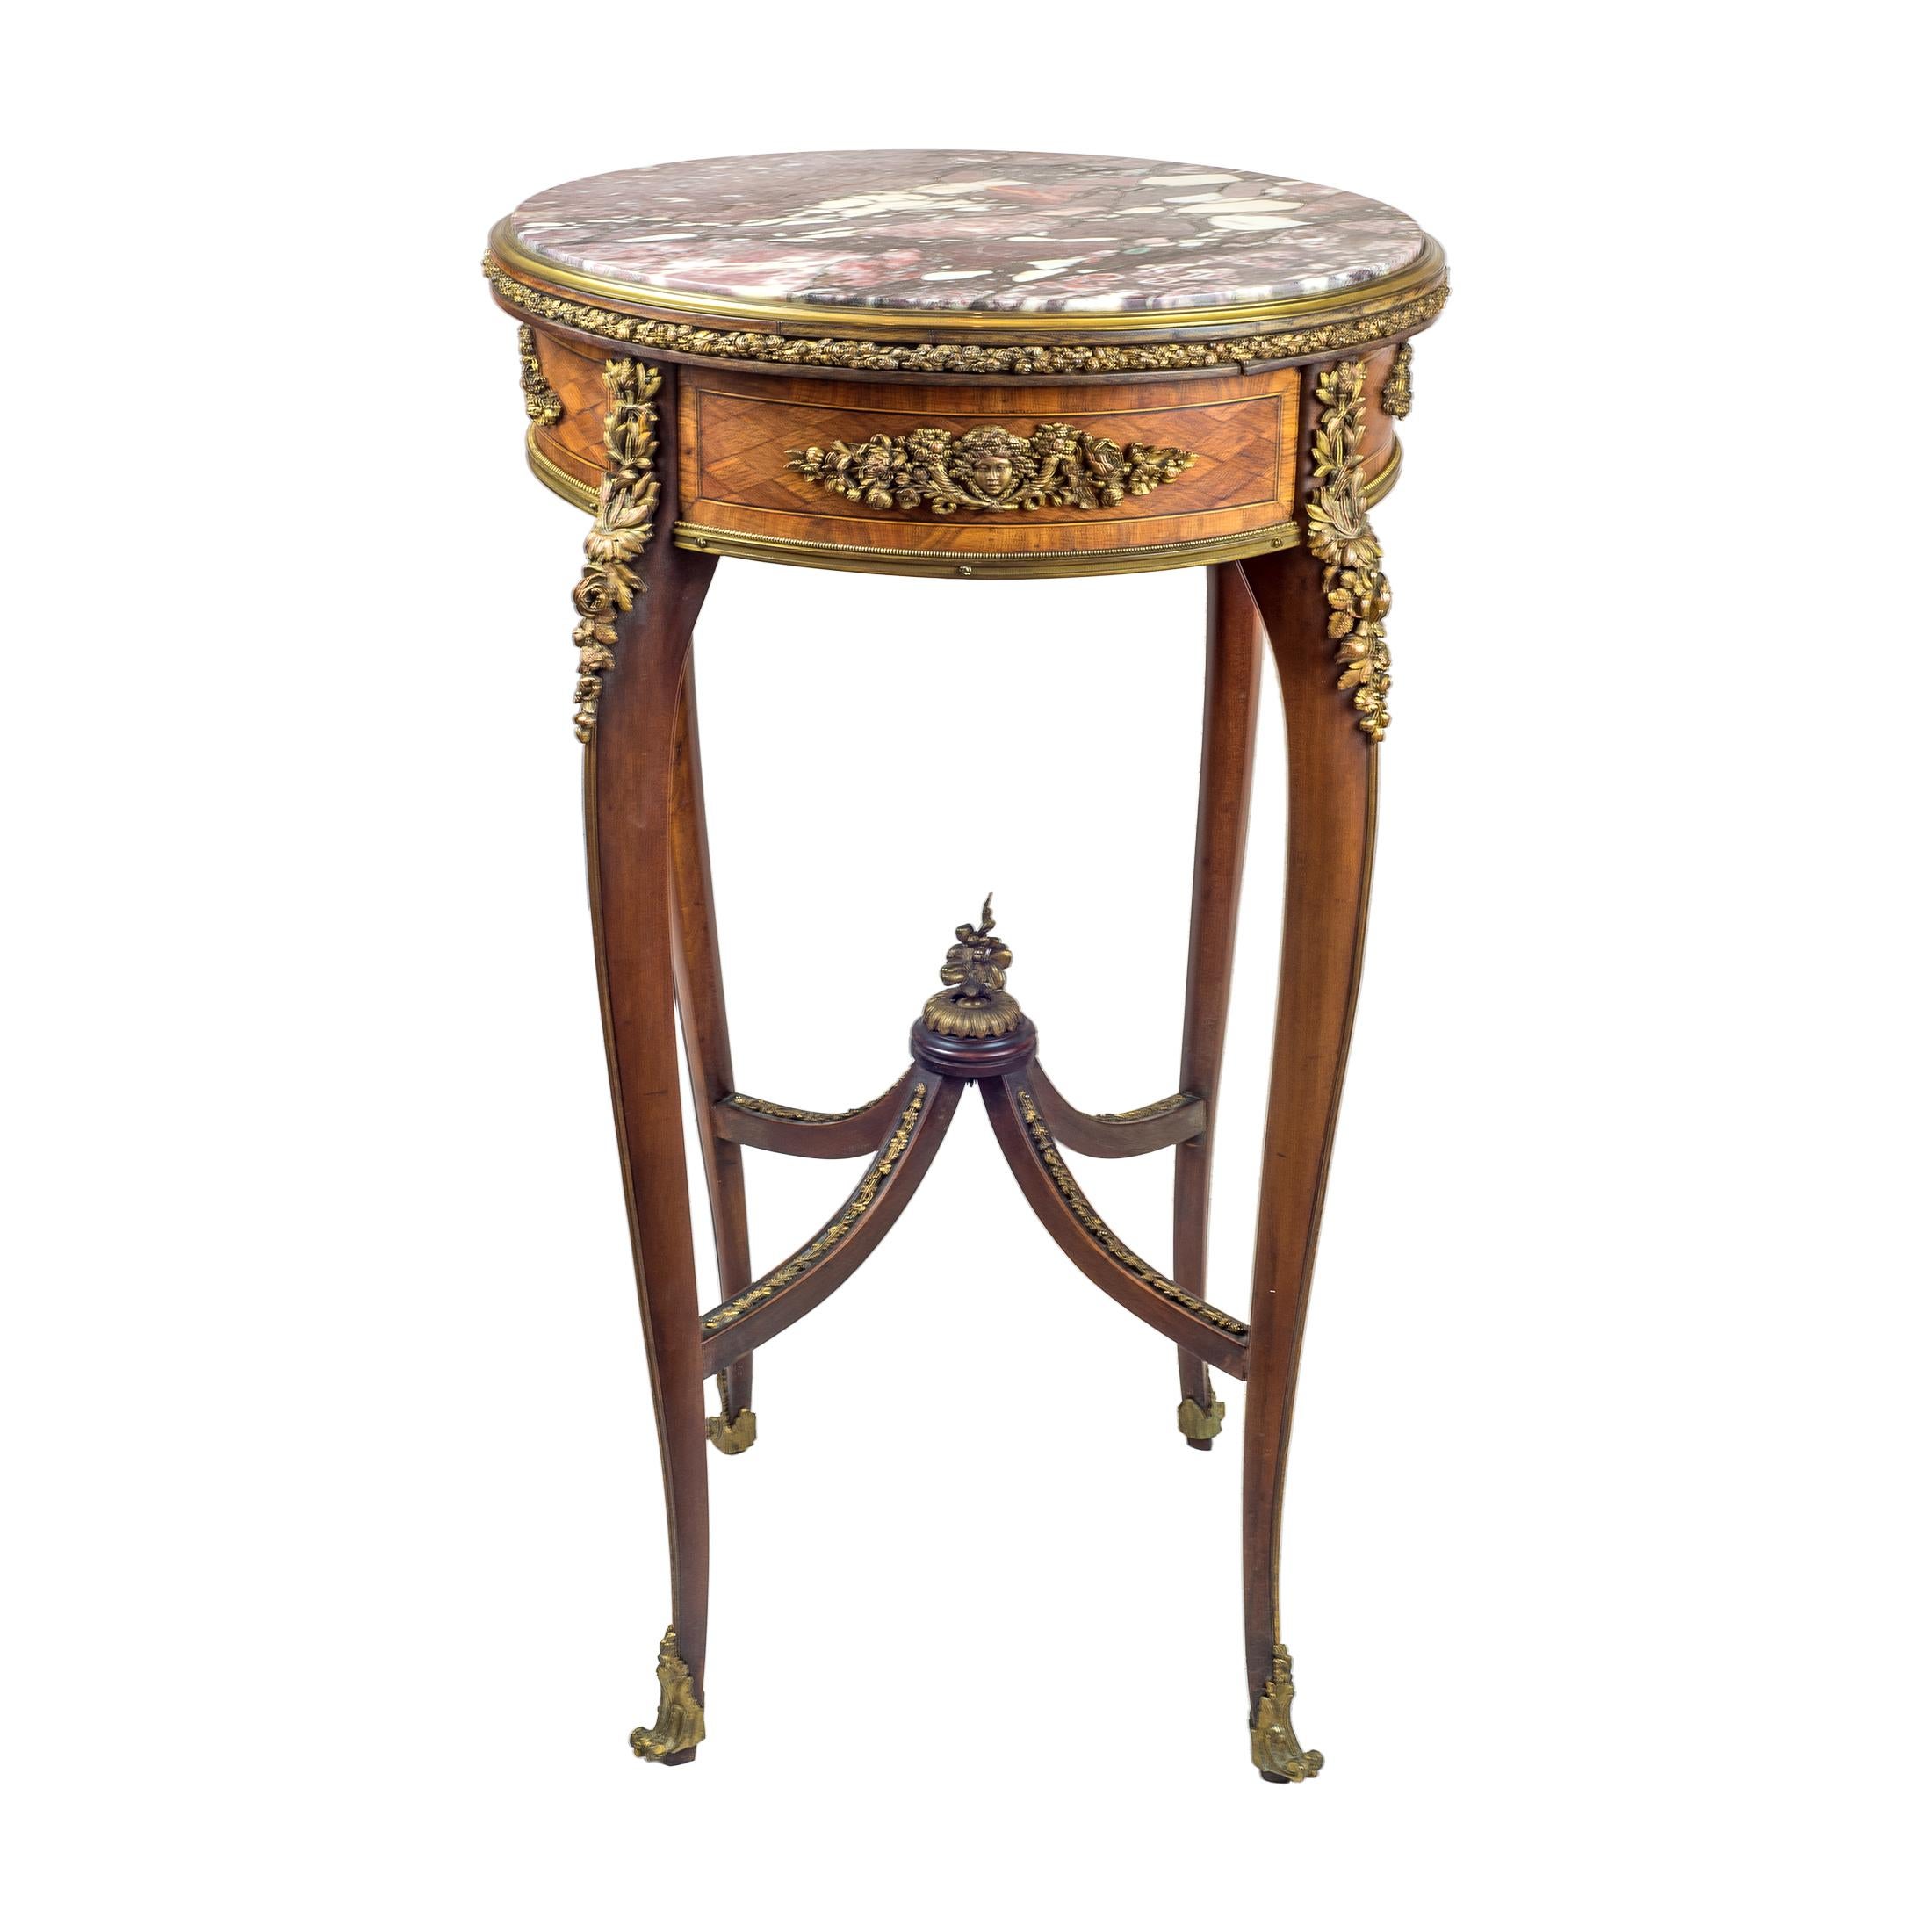 Date: Early 20th century
Origin: French
Dimension: 30 x 18 inches.

This rare and exquisite Louis XV-style guéridon dates to the early 20th century and reflects the exceptional craftsmanship of renowned French cabinetmaker, François Linke